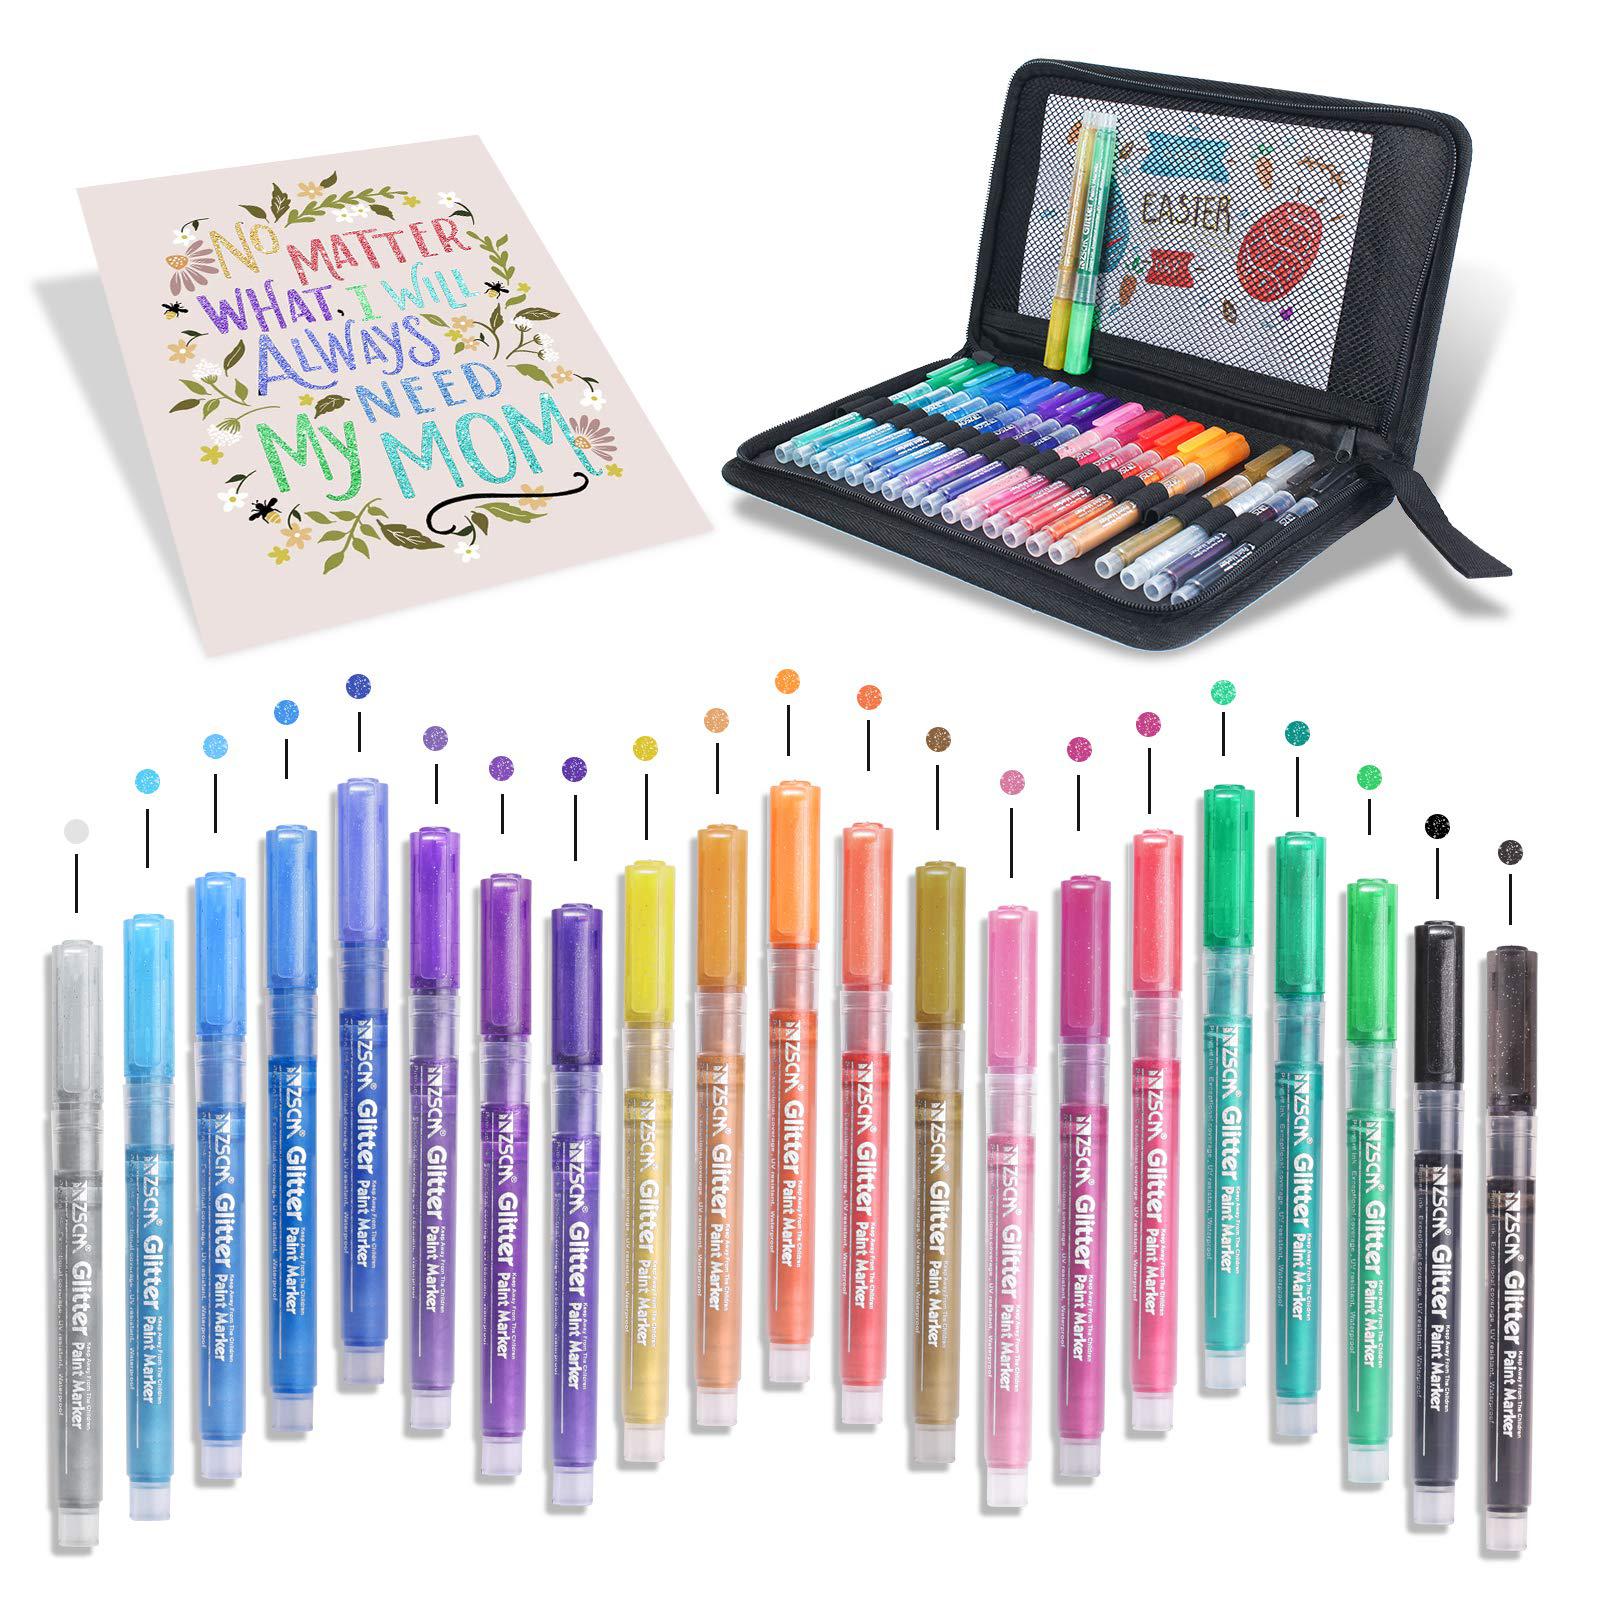 ZSCM QUALITY DECIDES THE FUTURE RNAB08CXKBTYN zscm 21 colors acrylic  glitter markers paint pens, rock painting pens markers metallic art marker  for kids adults card making